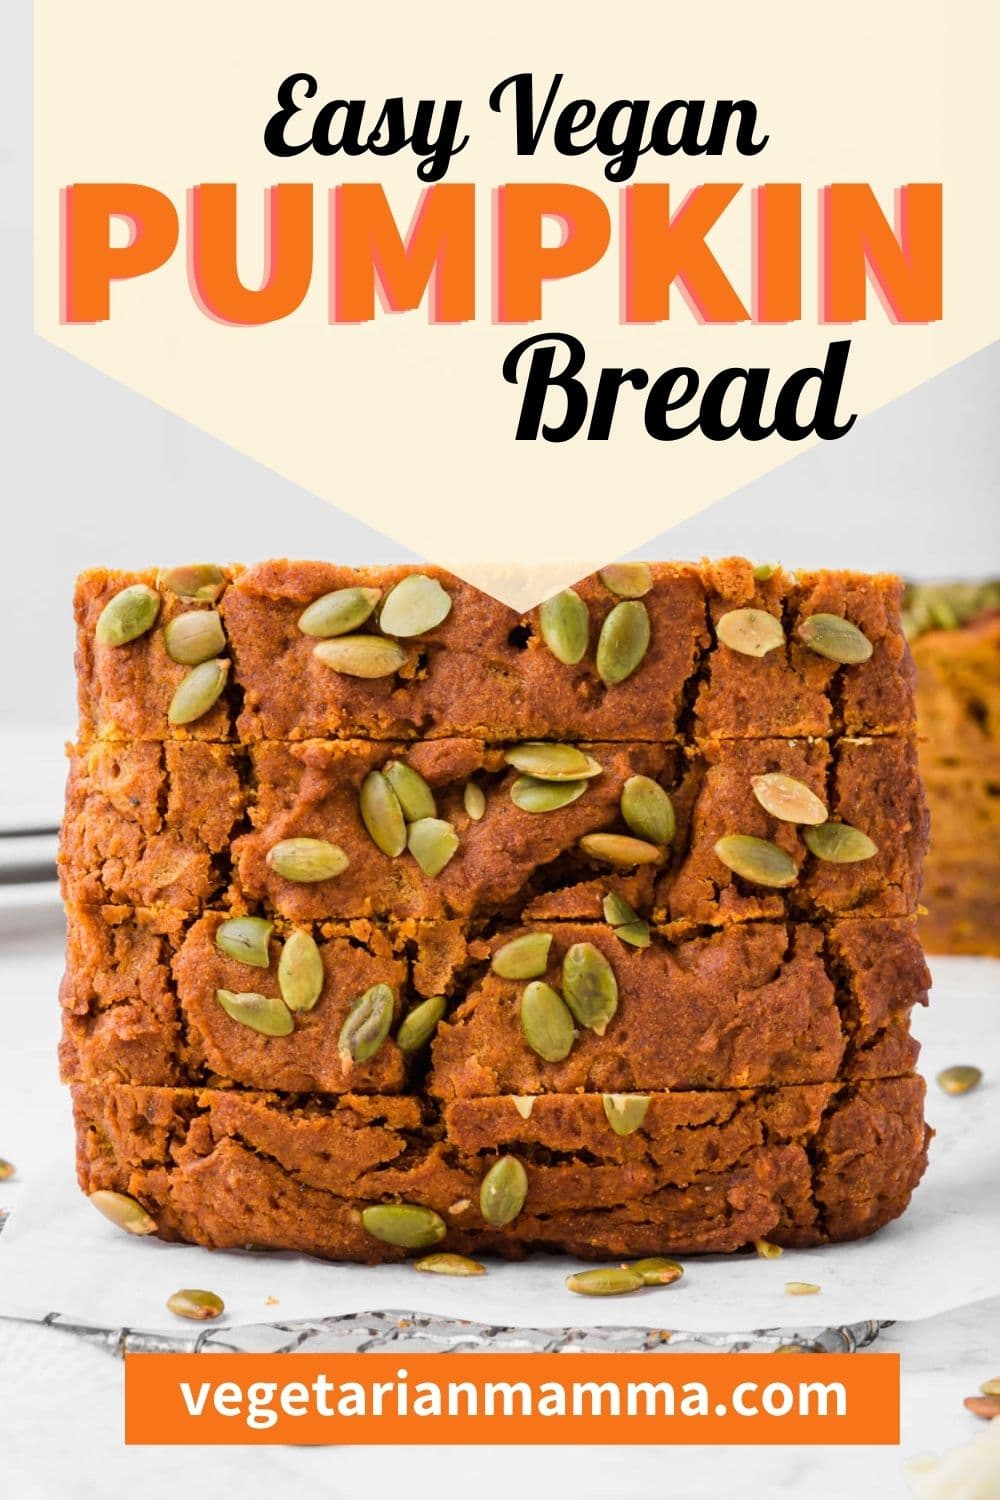 Vegan Pumpkin Bread is a quick and easy gluten-free bread that everyone will love for fall! If you miss Starbucks pumpkin bread, you won't with this delicious vegan recipe.